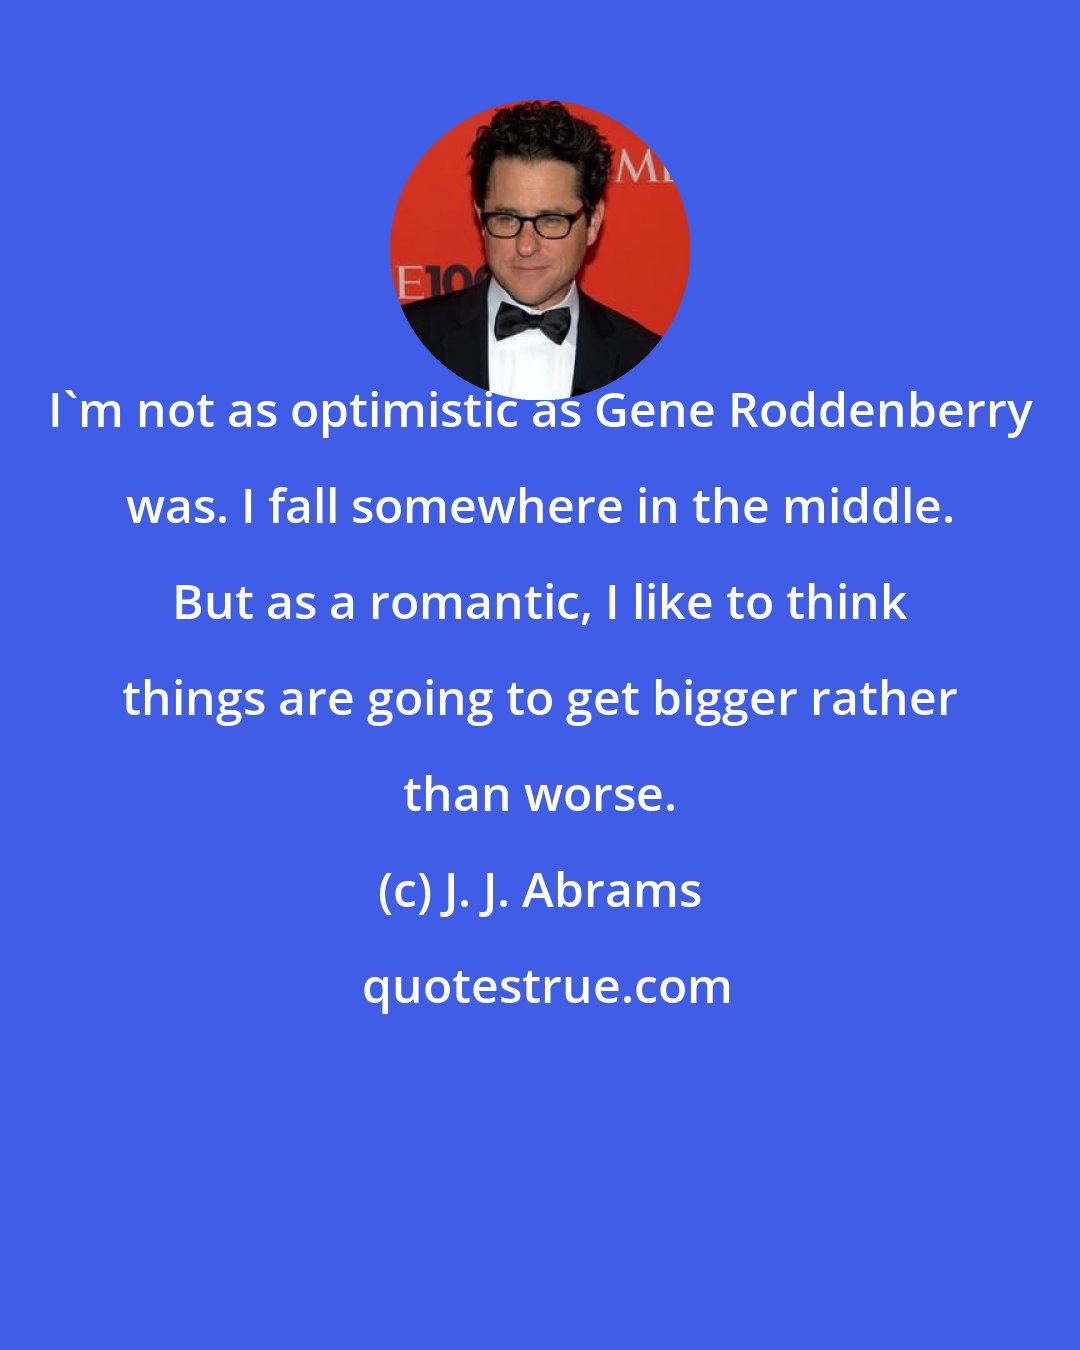 J. J. Abrams: I'm not as optimistic as Gene Roddenberry was. I fall somewhere in the middle. But as a romantic, I like to think things are going to get bigger rather than worse.